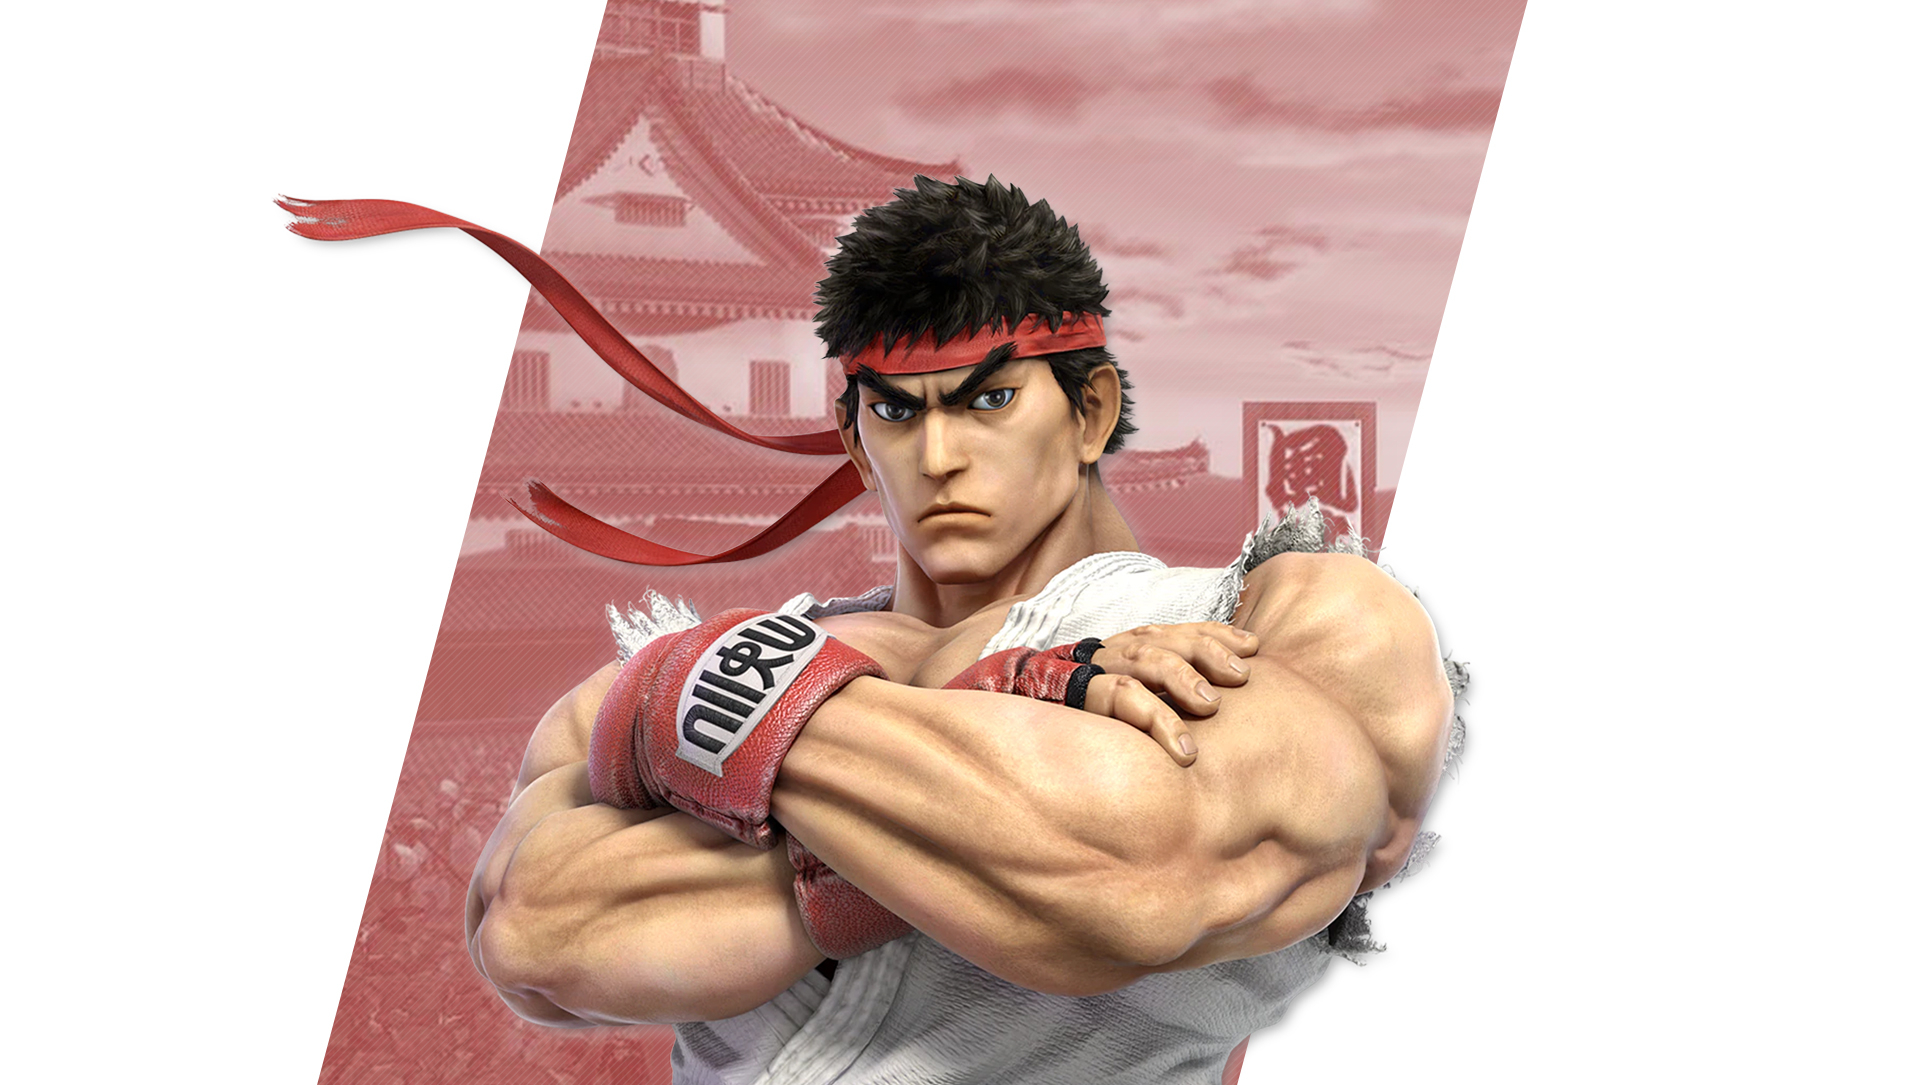 1929x1085 Super Smash Bros Ultimate Ryu Wallpapers Cat with Monocle